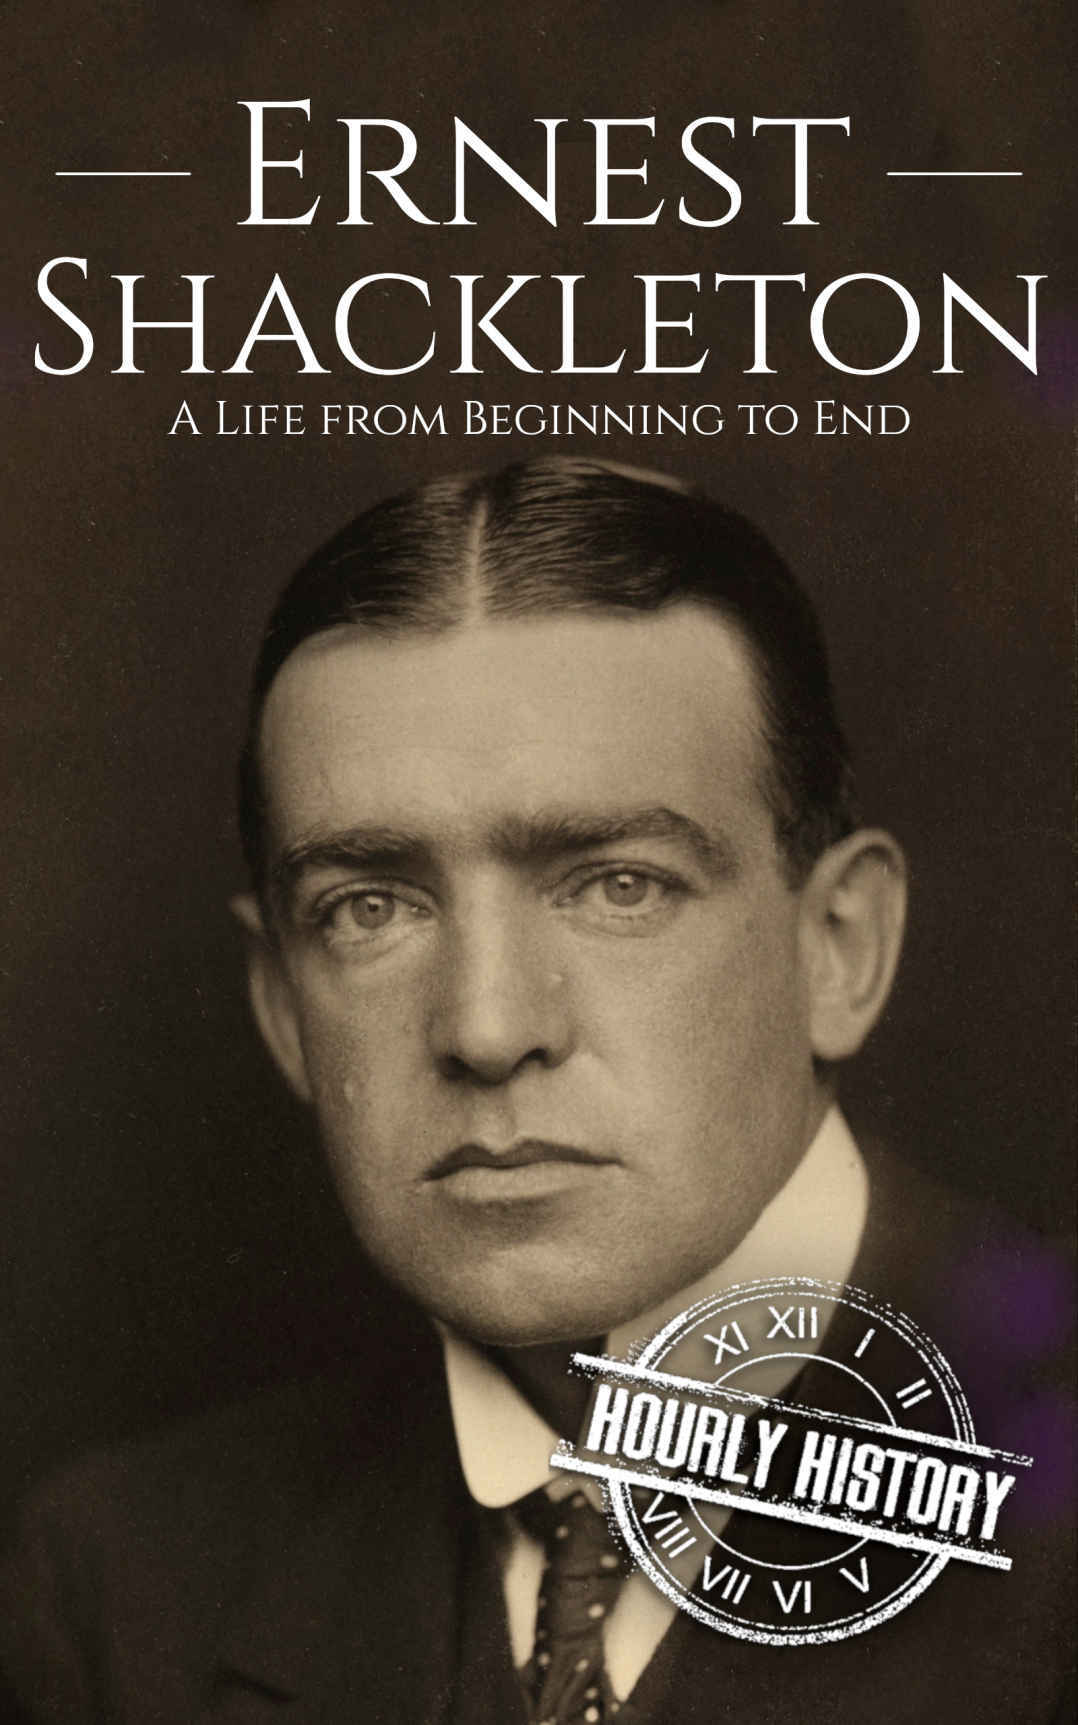 Ernest Shackleton: A Life from Beginning to End (Biographies of Explorers Book 1)